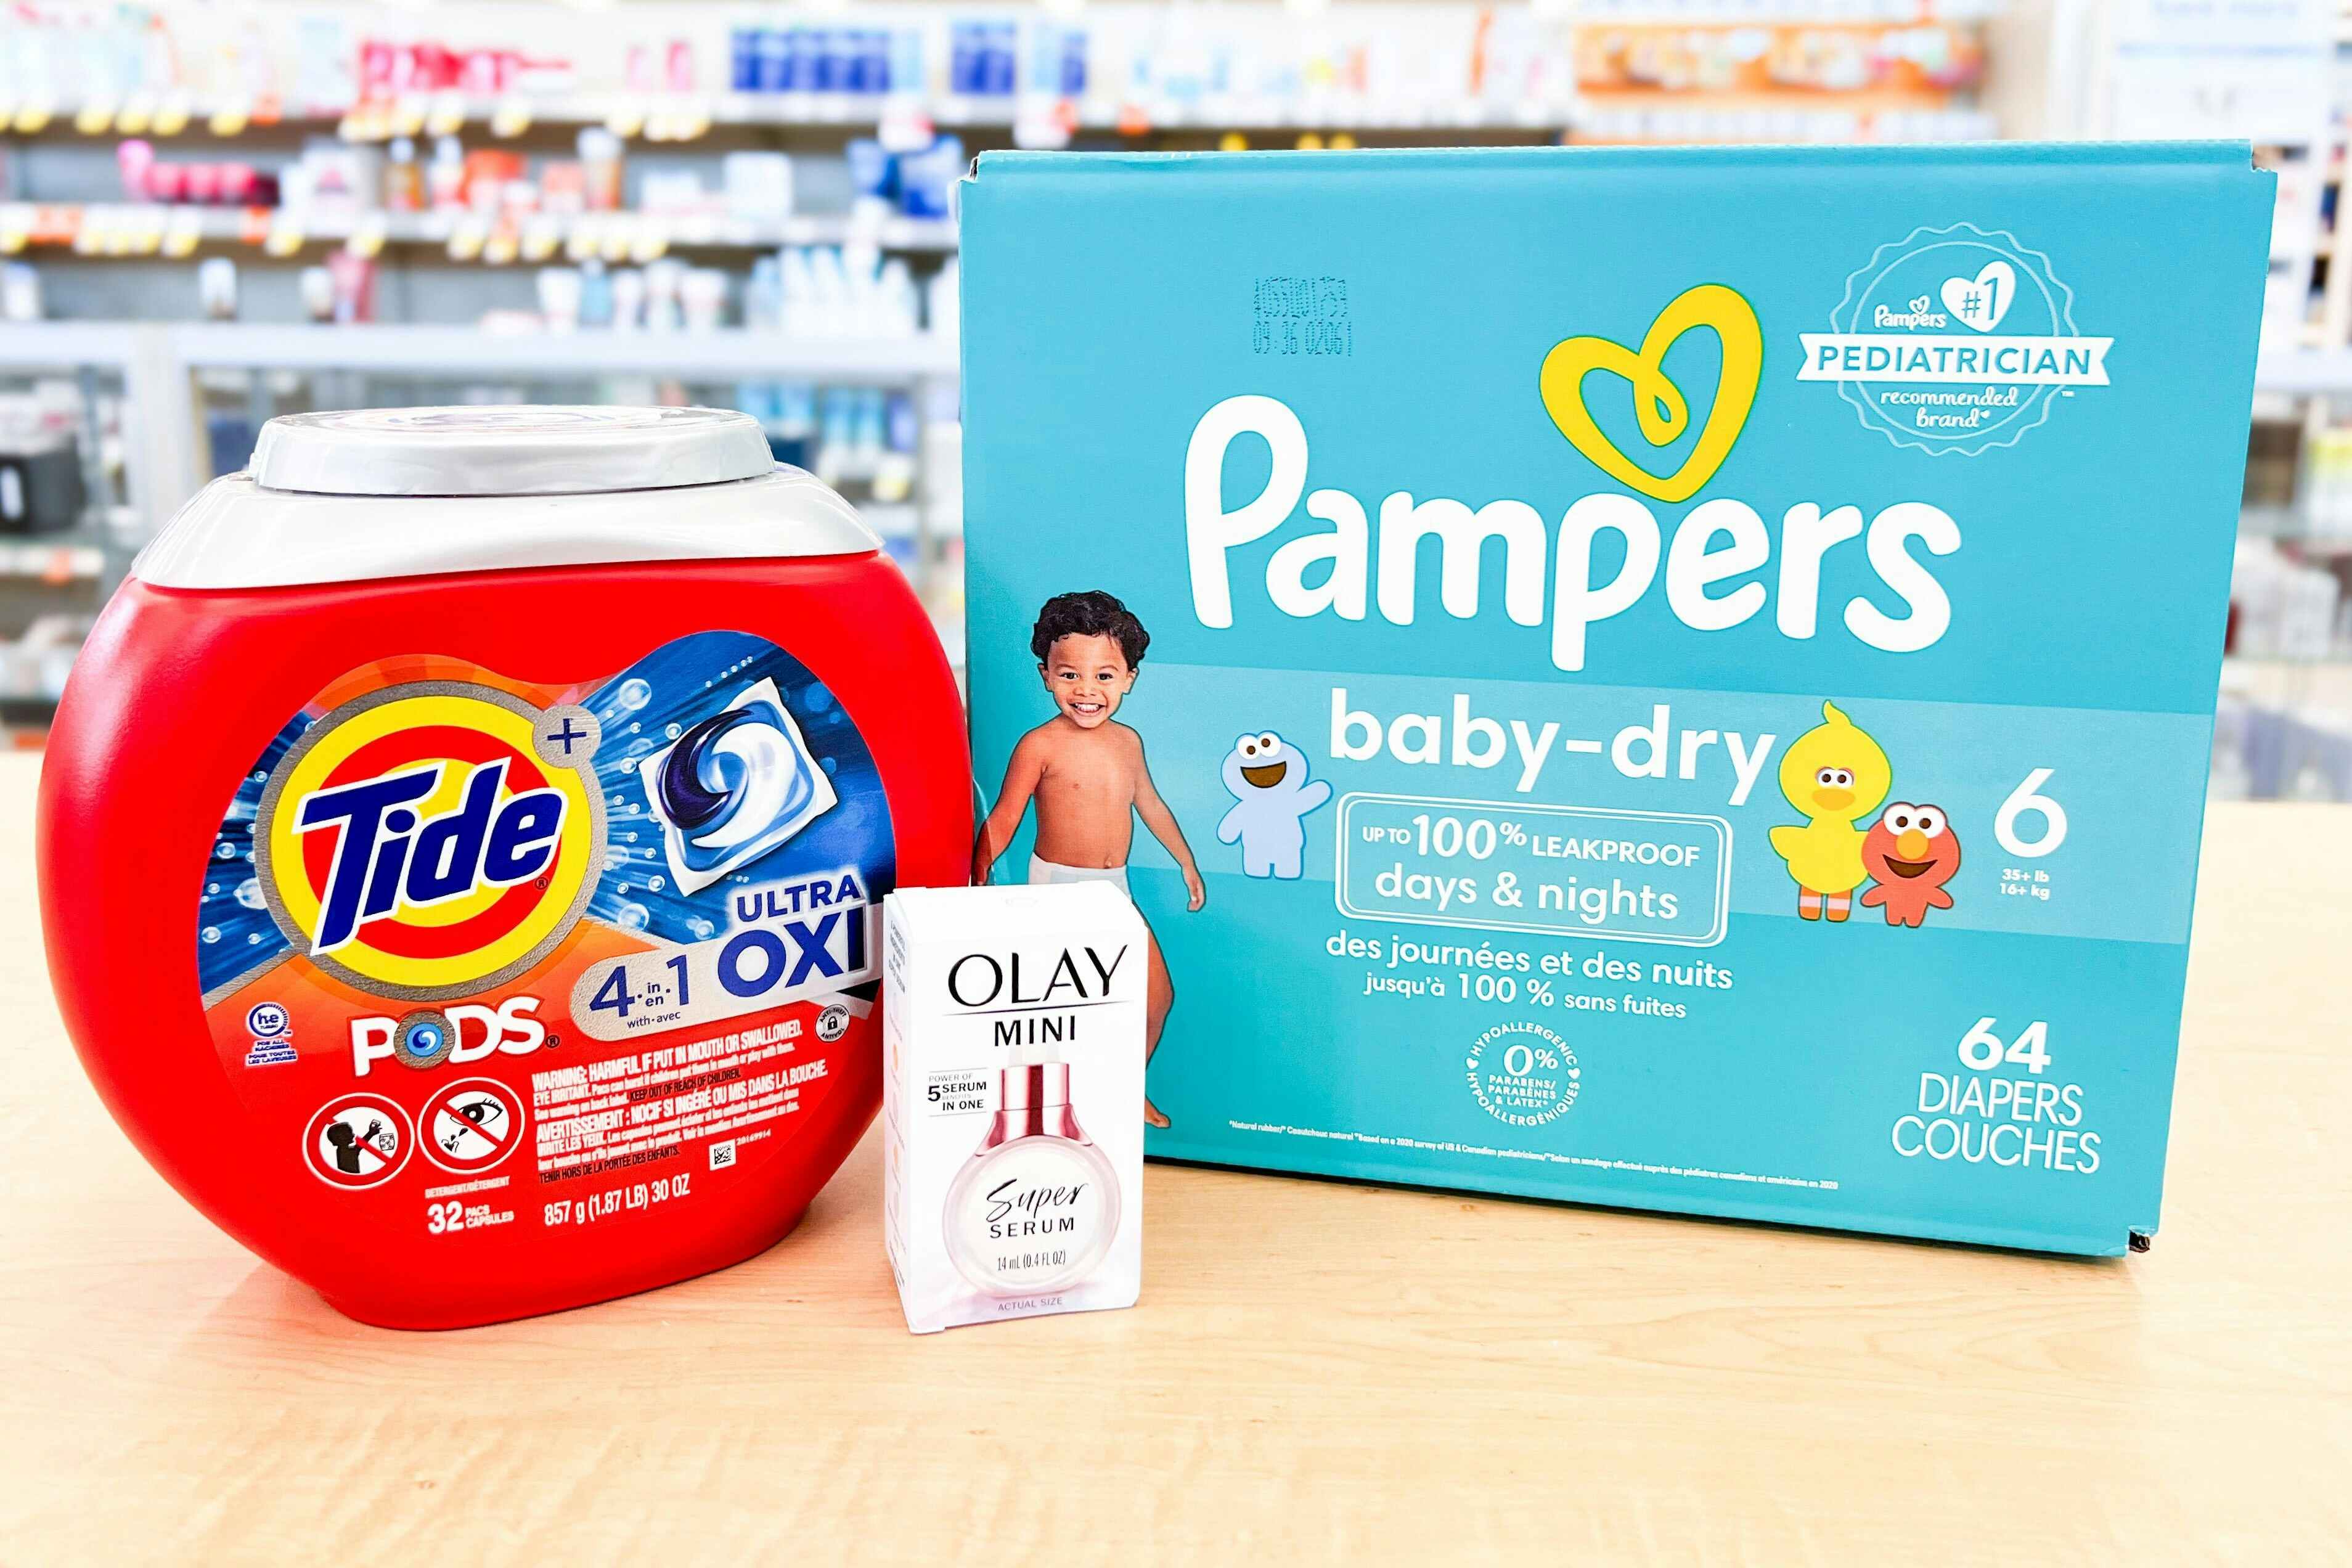 P&G Deals at Walgreens: Over 50% Off Tide and Pampers, Plus Olay Deal